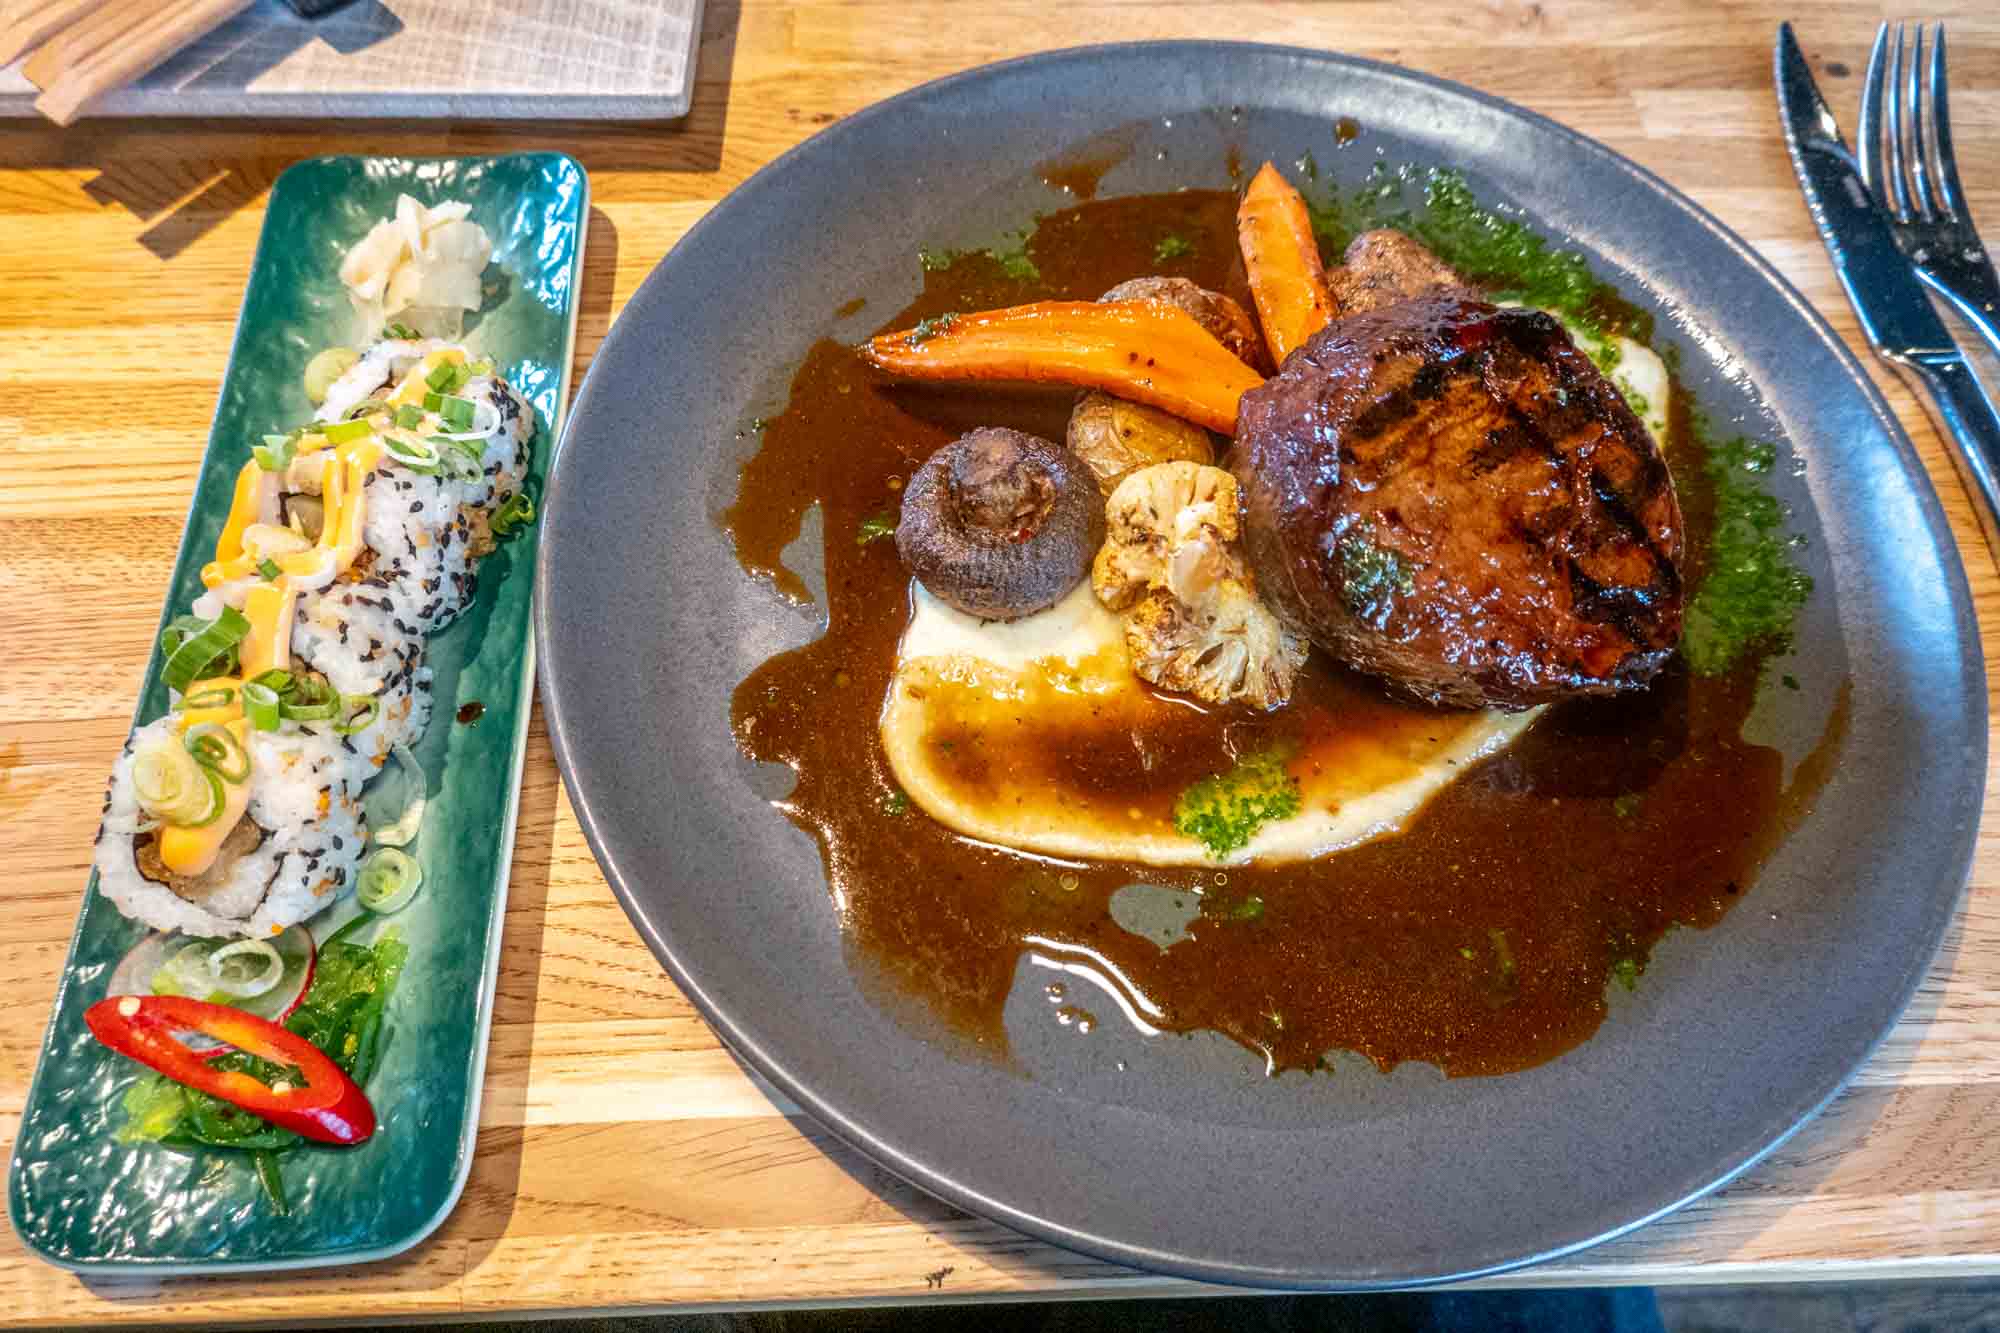 Plate of steak with potatoes, carrots and mushrooms, next to small plate of sushi at Rub 23 in Akureyri